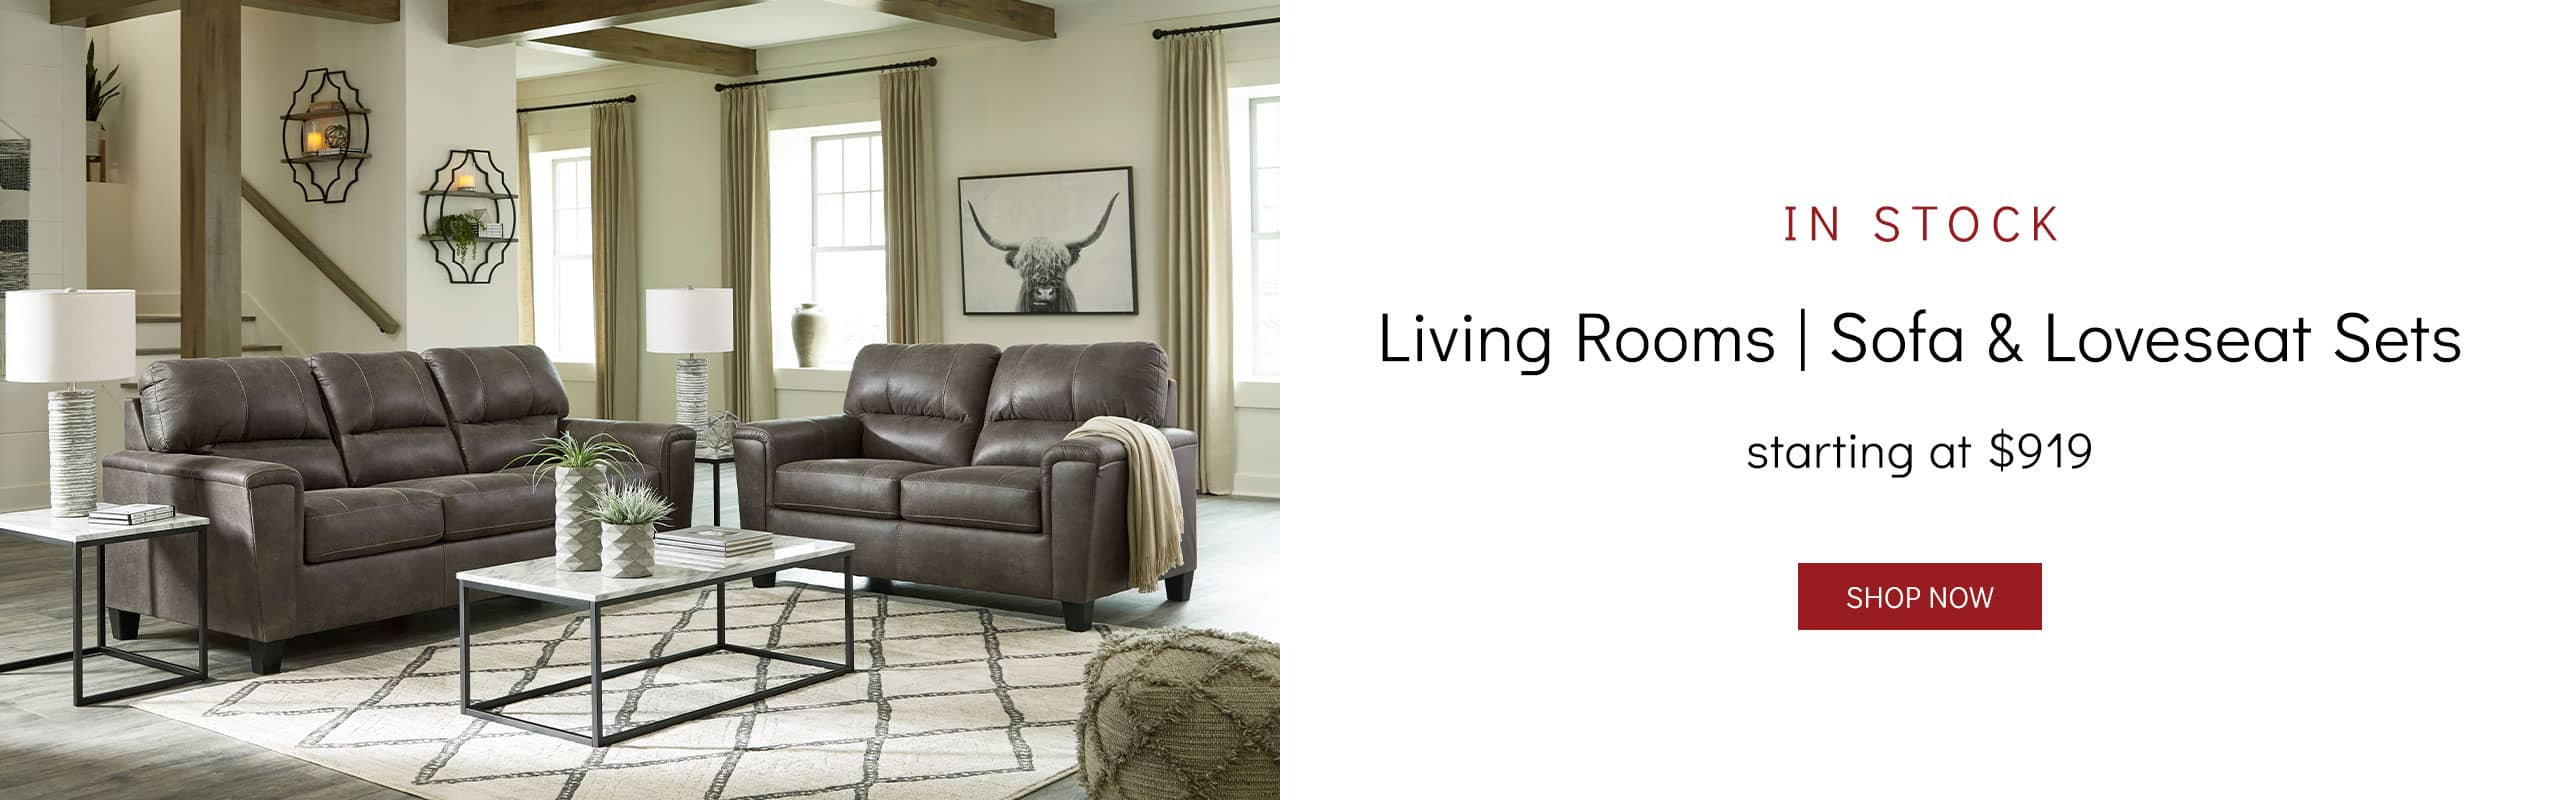 in stock: living room sets